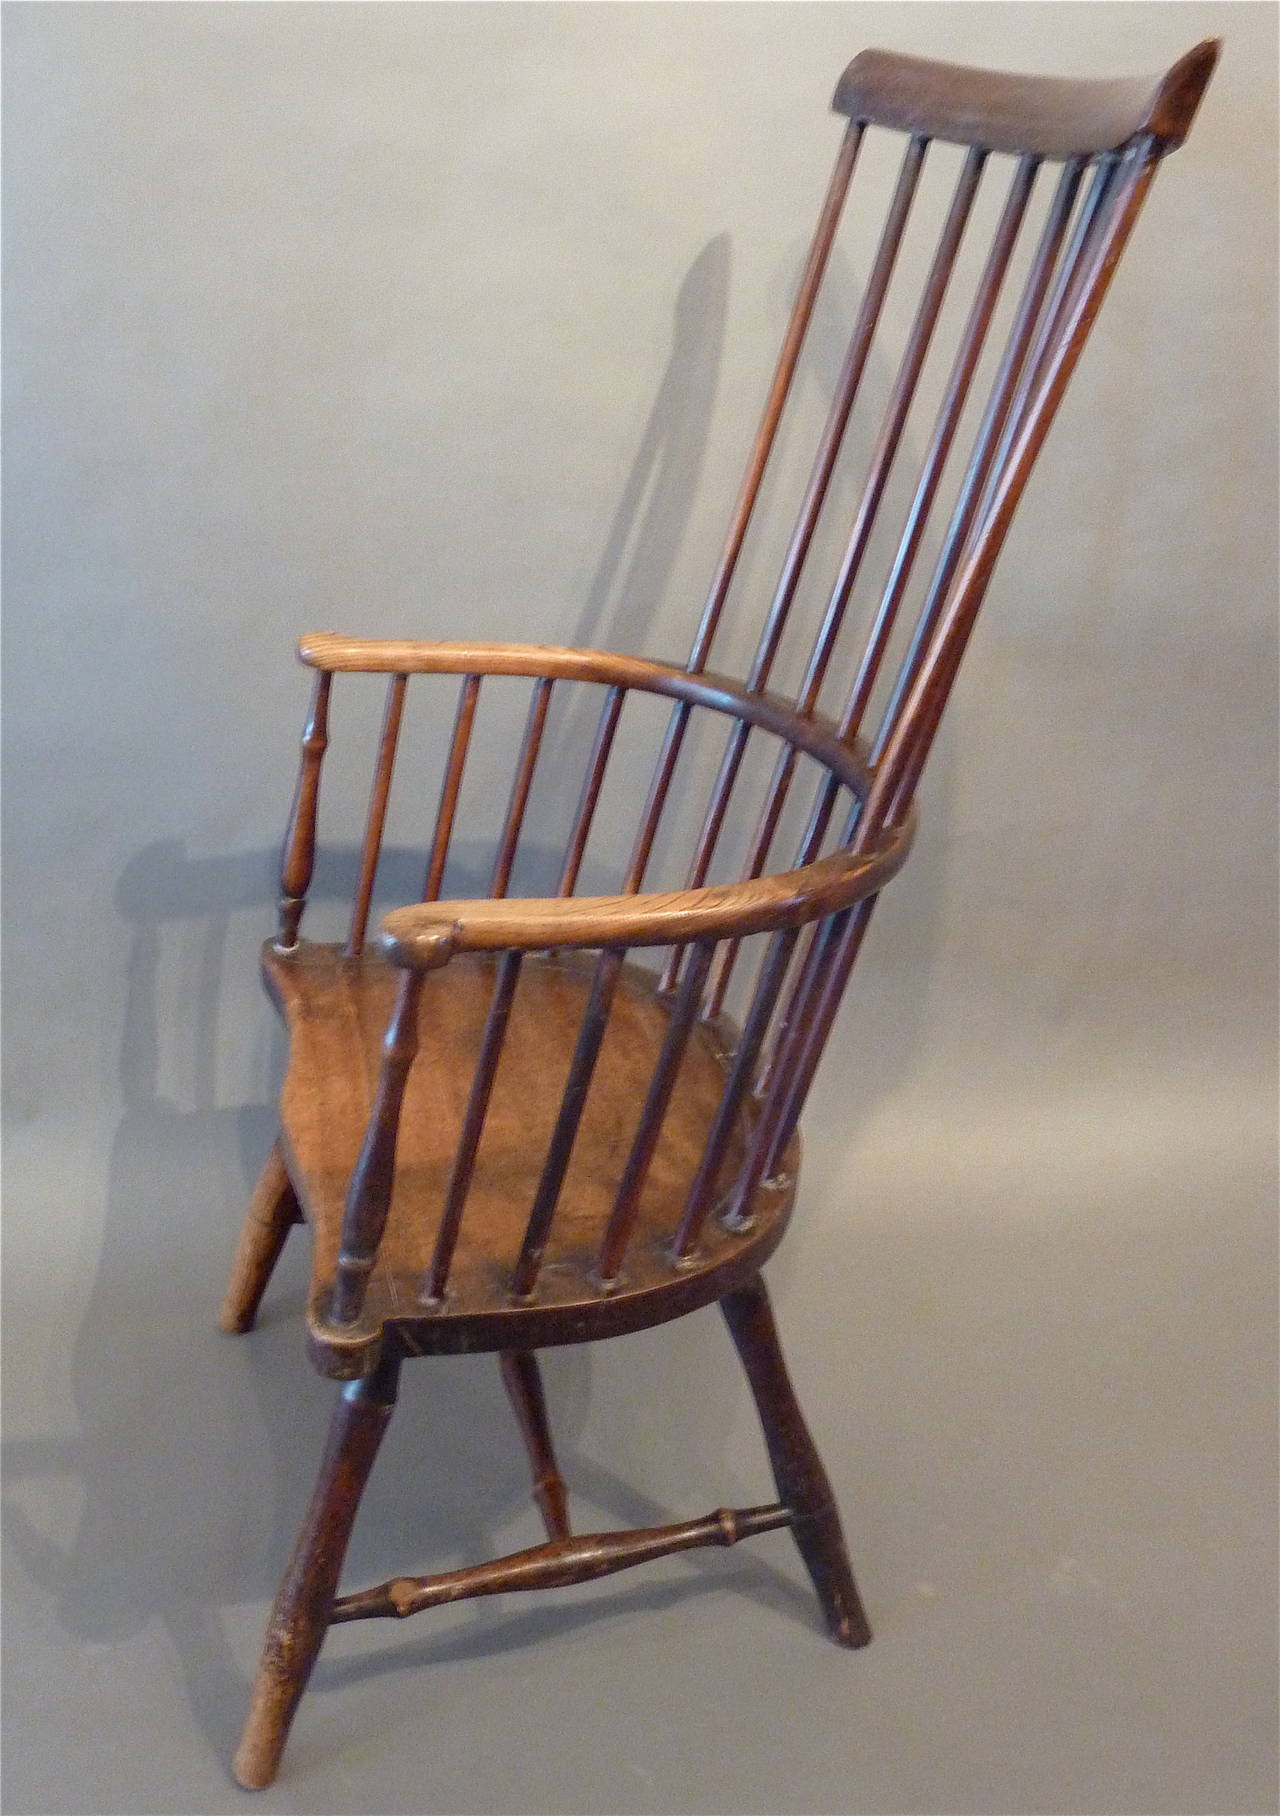 18th Century English “Comb-Back” Windsor Armchair. Made of Ash, Elm, and Walnut with a deep, lustrous color and warm patination. Delicate spindles and elegant curved arms over a “saddle” seat with simply turned legs and stretchers. Extremely